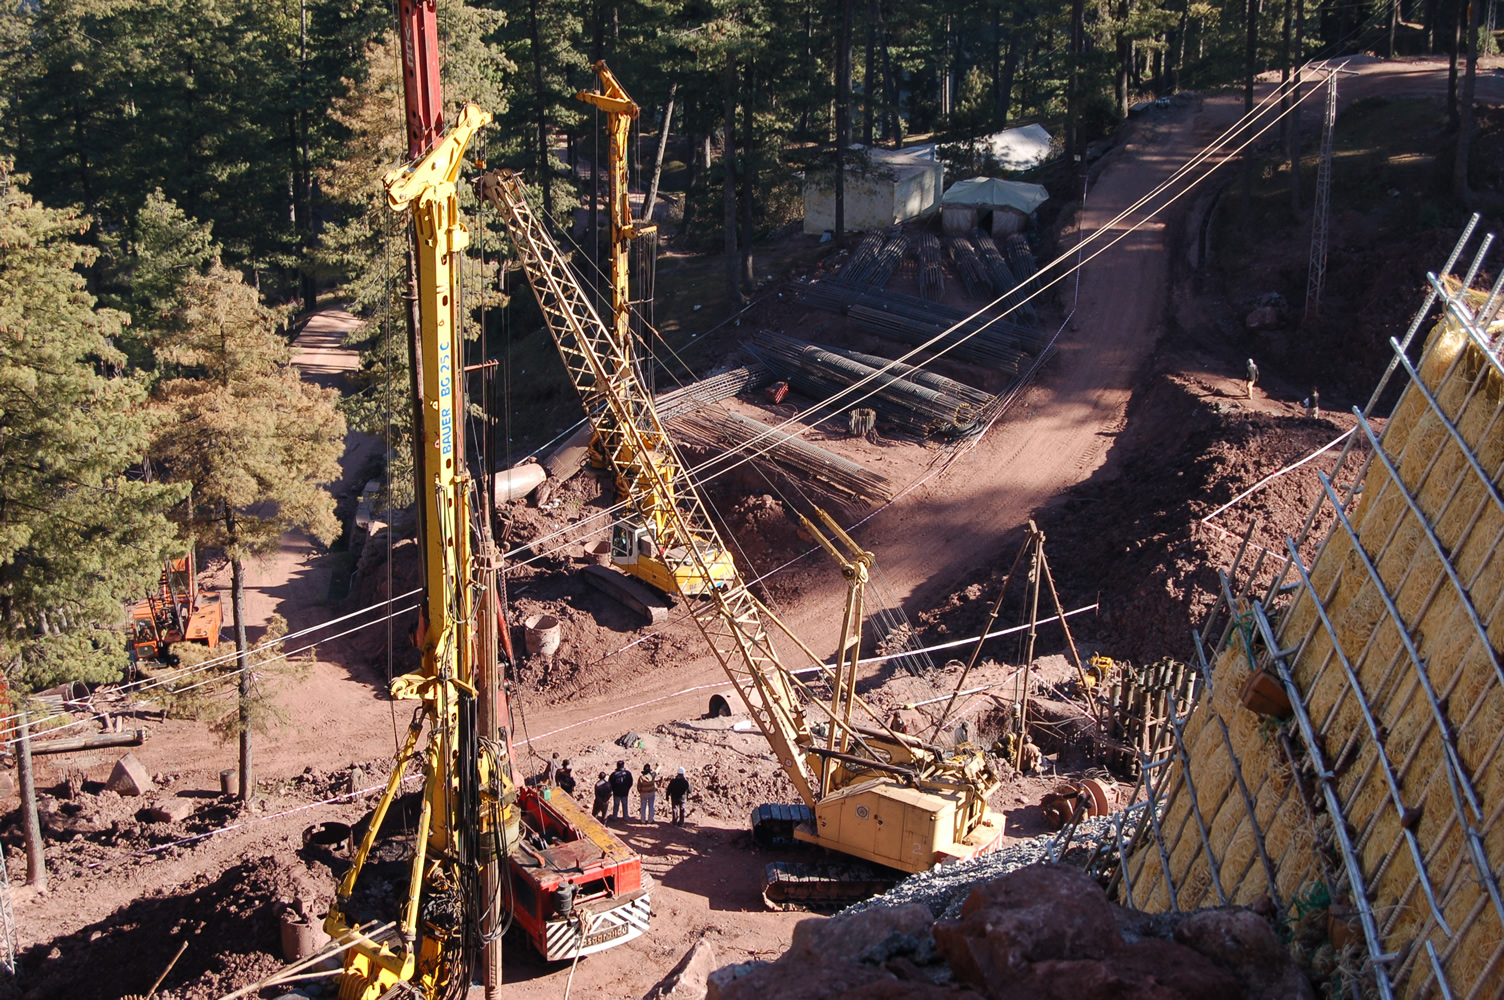 Piling using Hydraulic Rotary Machines for Slope Protection Works at Jhika Gali, Murree